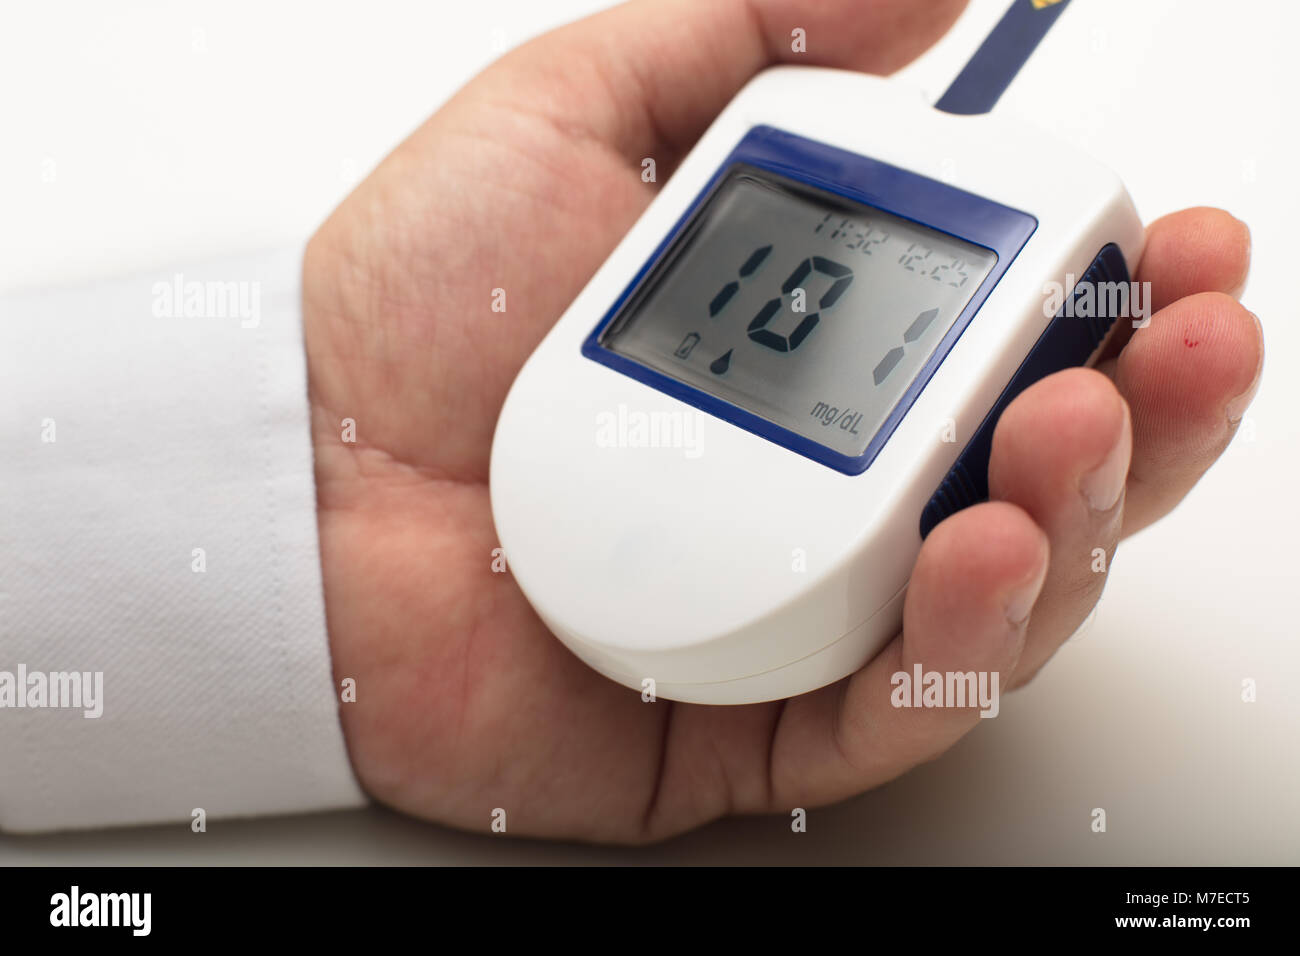 Man with diabetes holding a portable digital glucose meter in his hand as  he measures his own blood sugar levels after drawing a drop of blood from hi  Stock Photo - Alamy